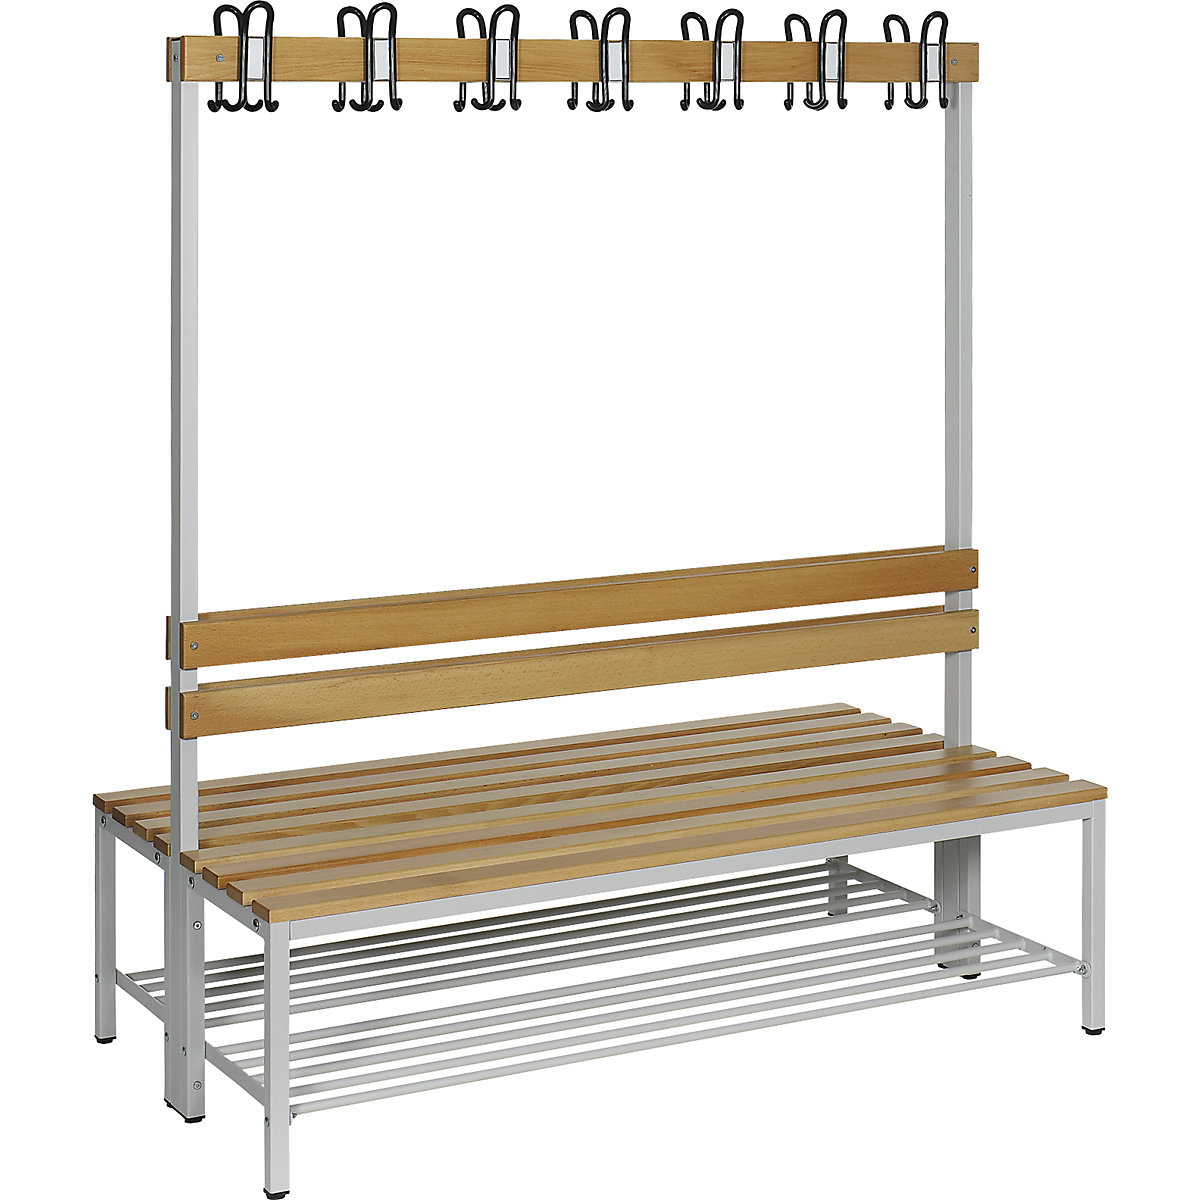 Beech cloakroom bench – eurokraft basic, double sided with back rest, HxD 1700 x 850 mm, length 1500 mm-6